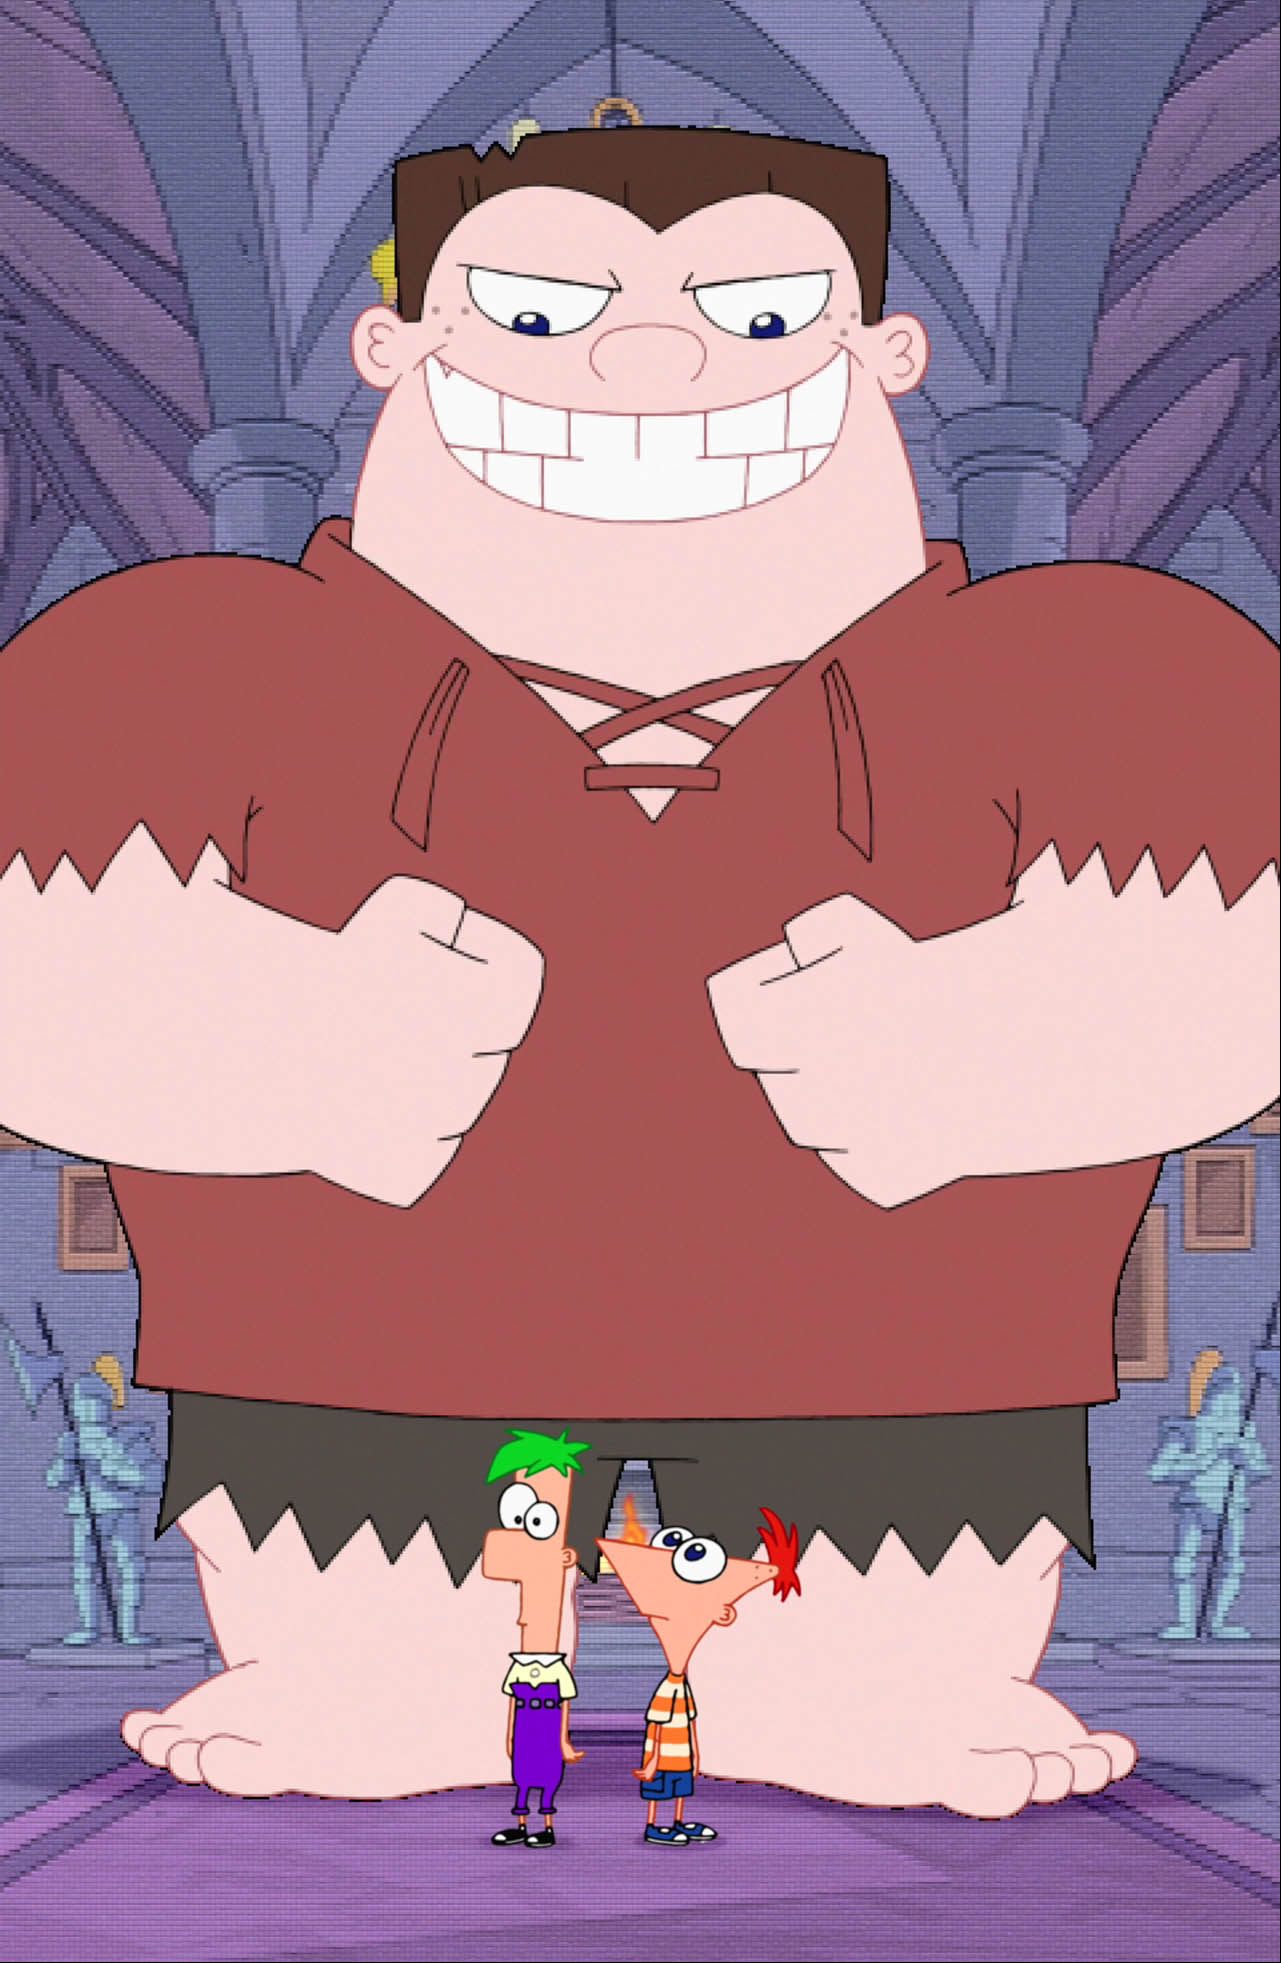 Giant Buford is the final boss in Phineas' and Ferb's video game....